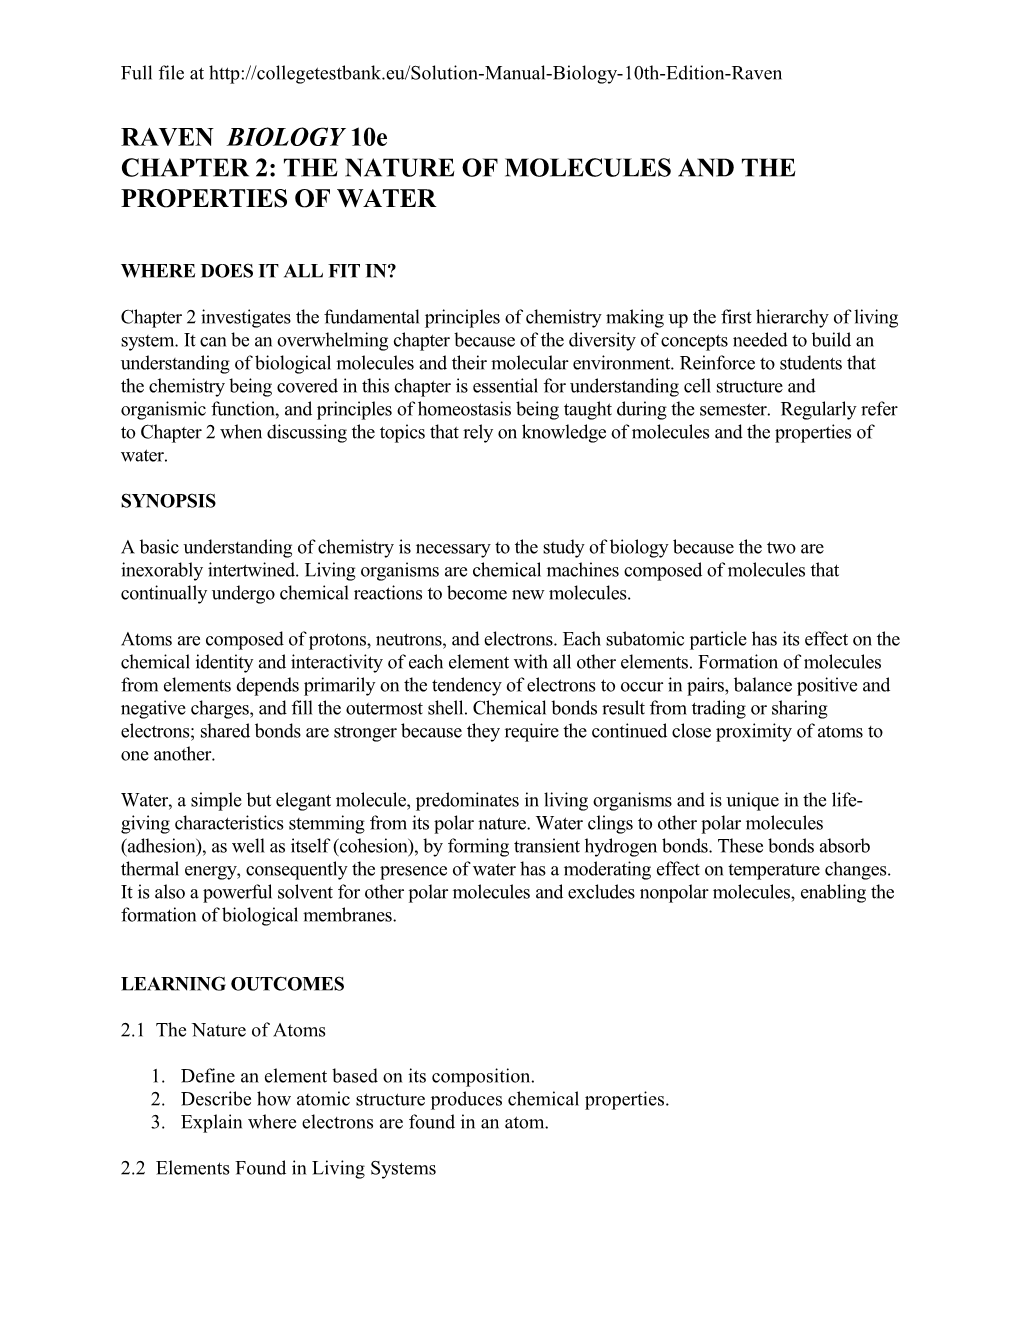 Chapter 2: the Nature of Molecules and the Properties of Water